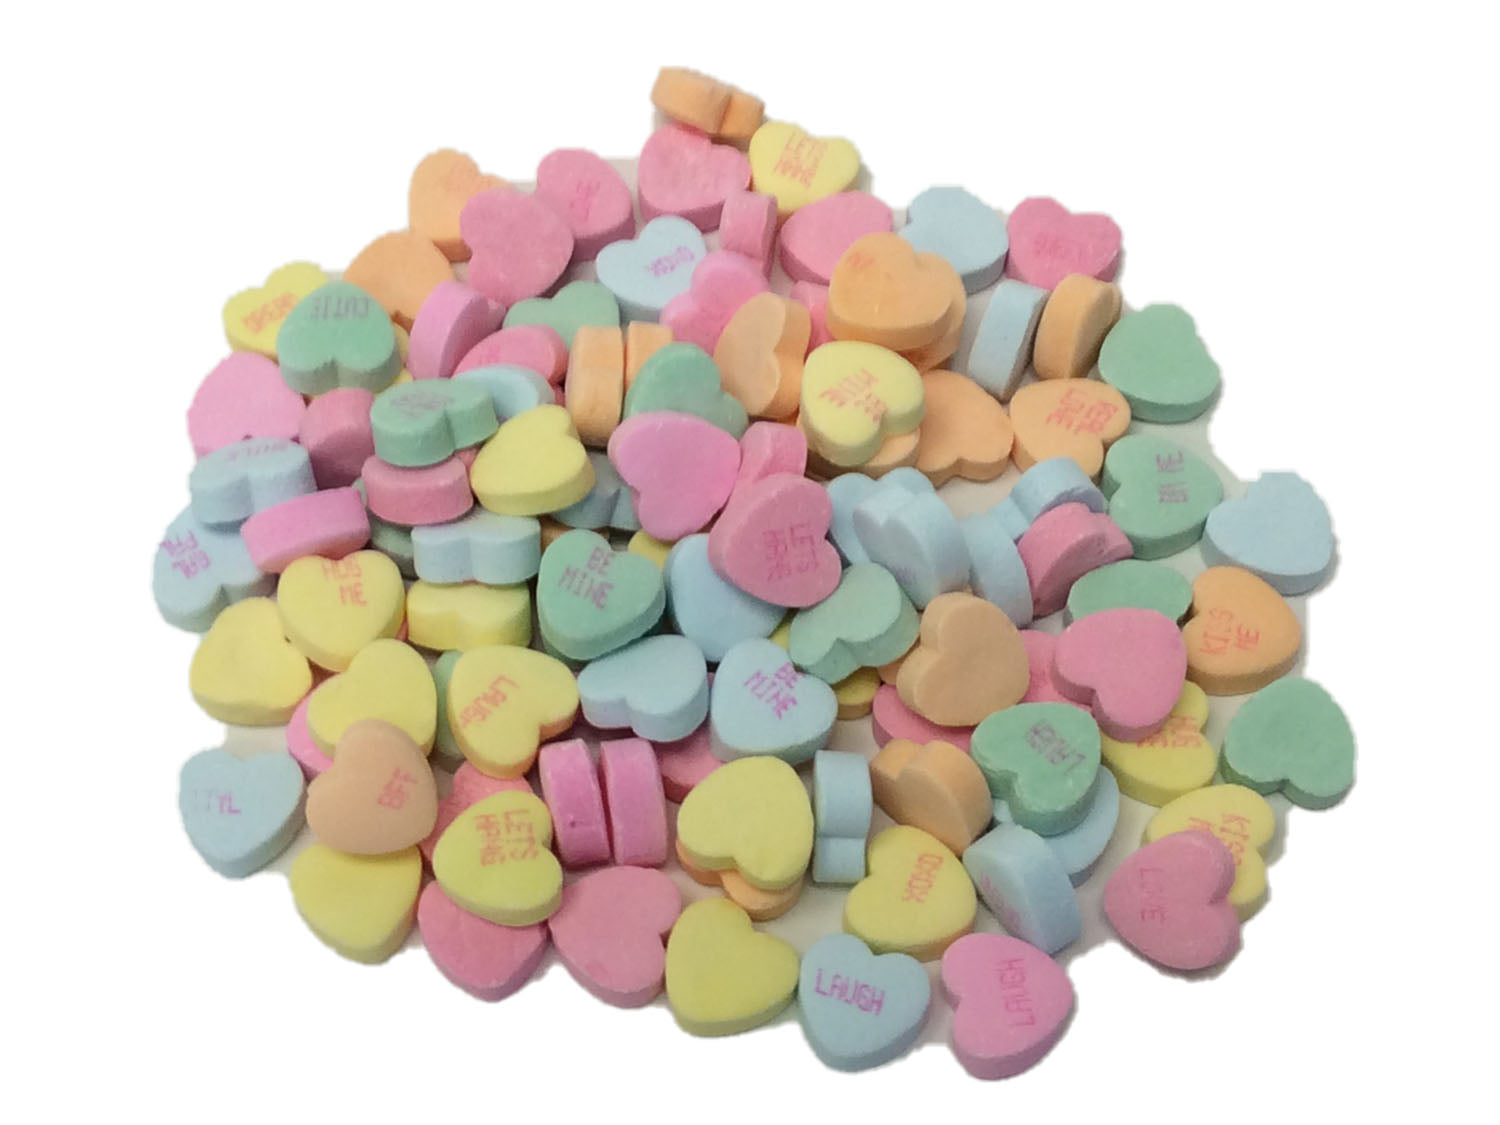 Save on Brach's Friends Conversation Hearts Candy Large Order Online  Delivery